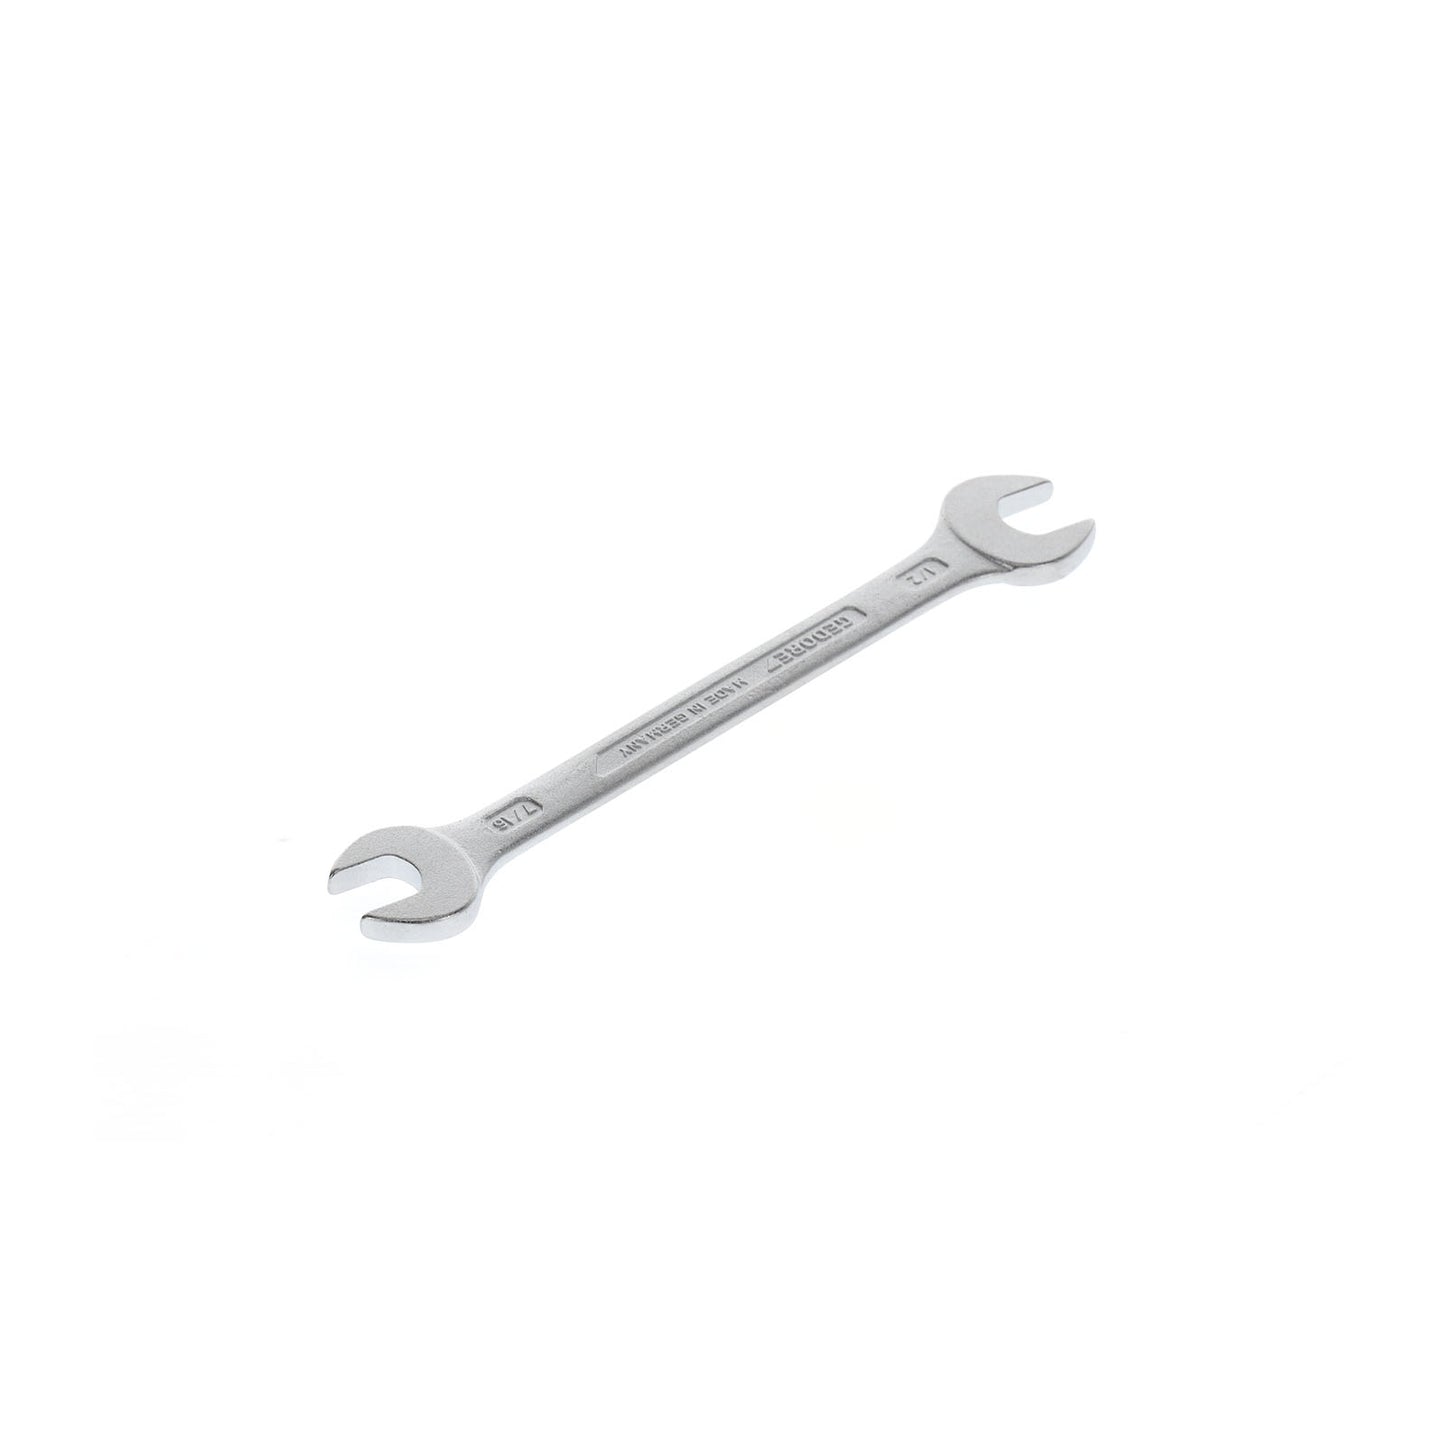 GEDORE 6 7/16X1/2AF - 2-Mount Fixed Wrench, 7/16x1/2AF (6070370)